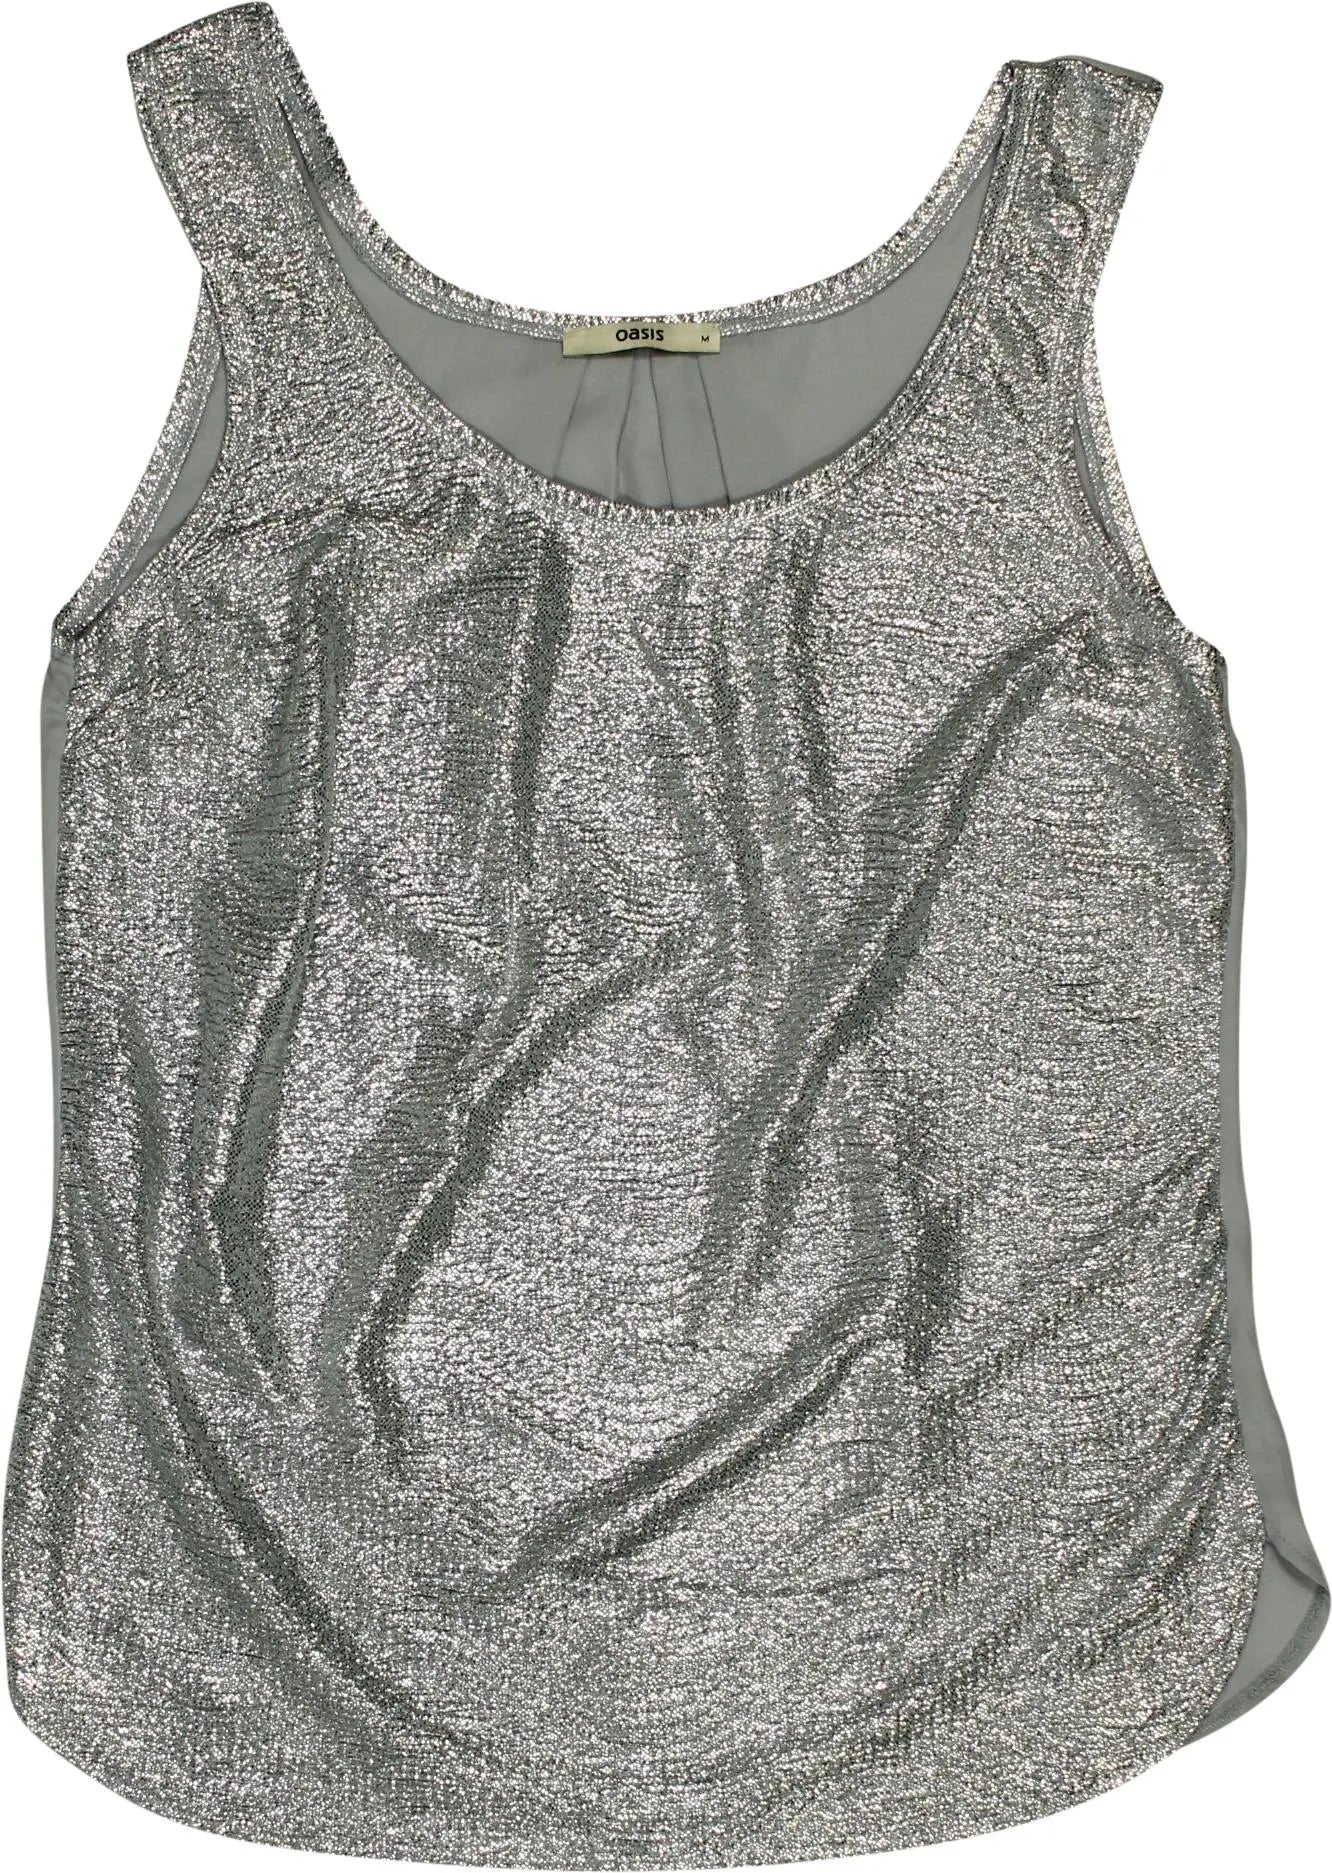 Oasis - Silver Glitter Top- ThriftTale.com - Vintage and second handclothing